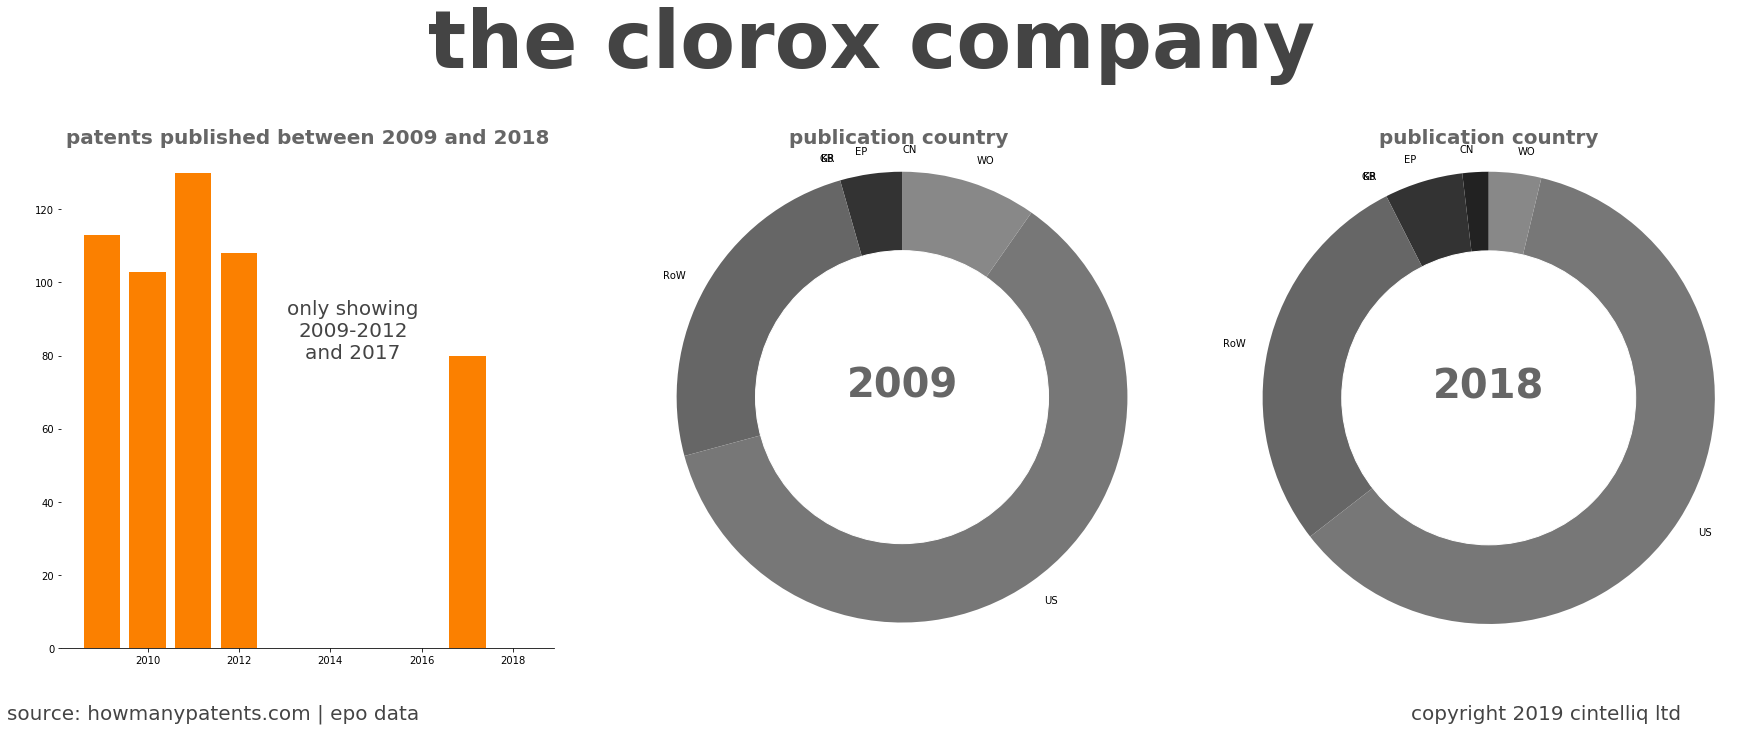 summary of patents for The Clorox Company